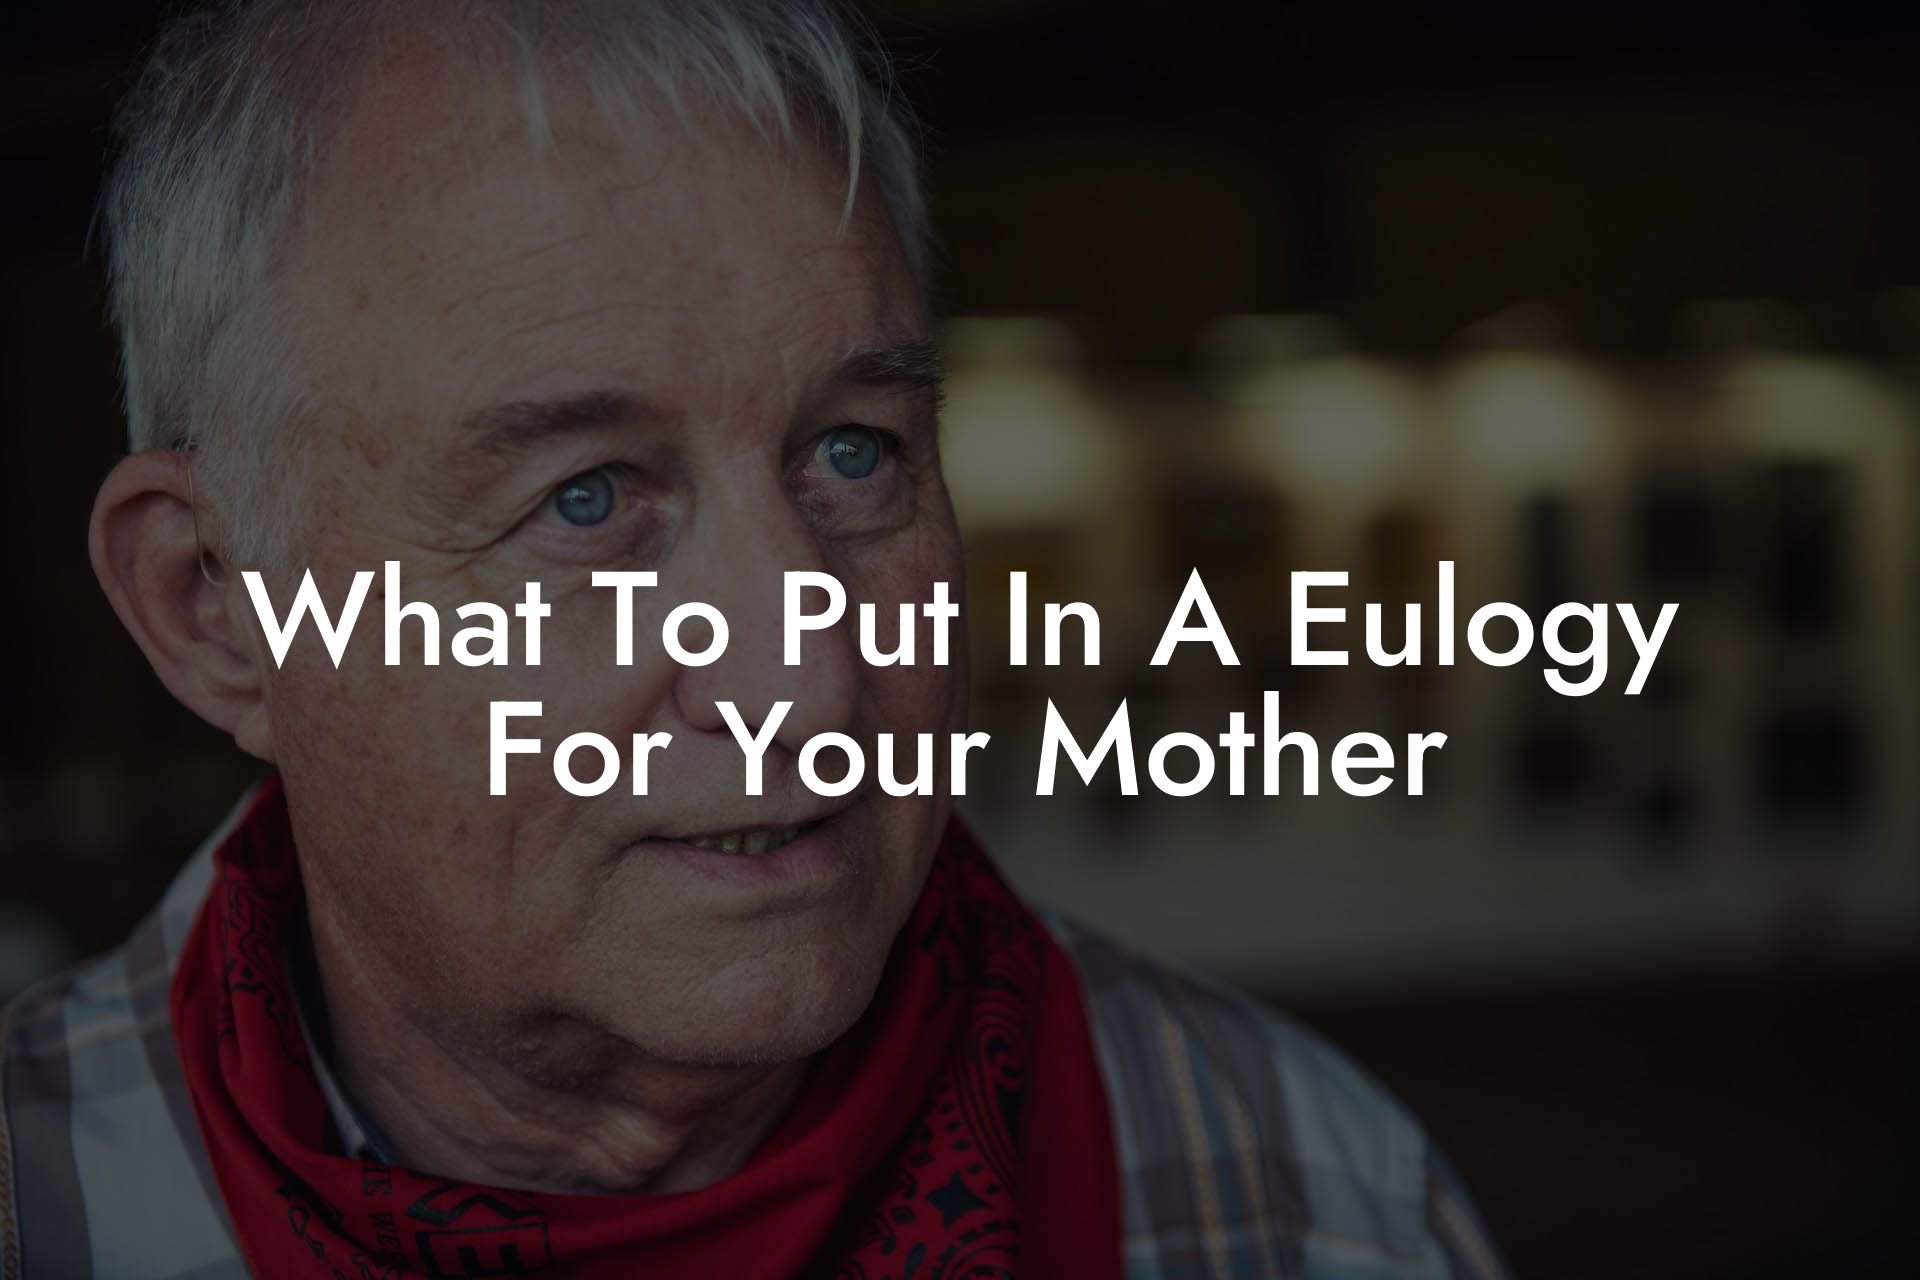 What To Put In A Eulogy For Your Mother